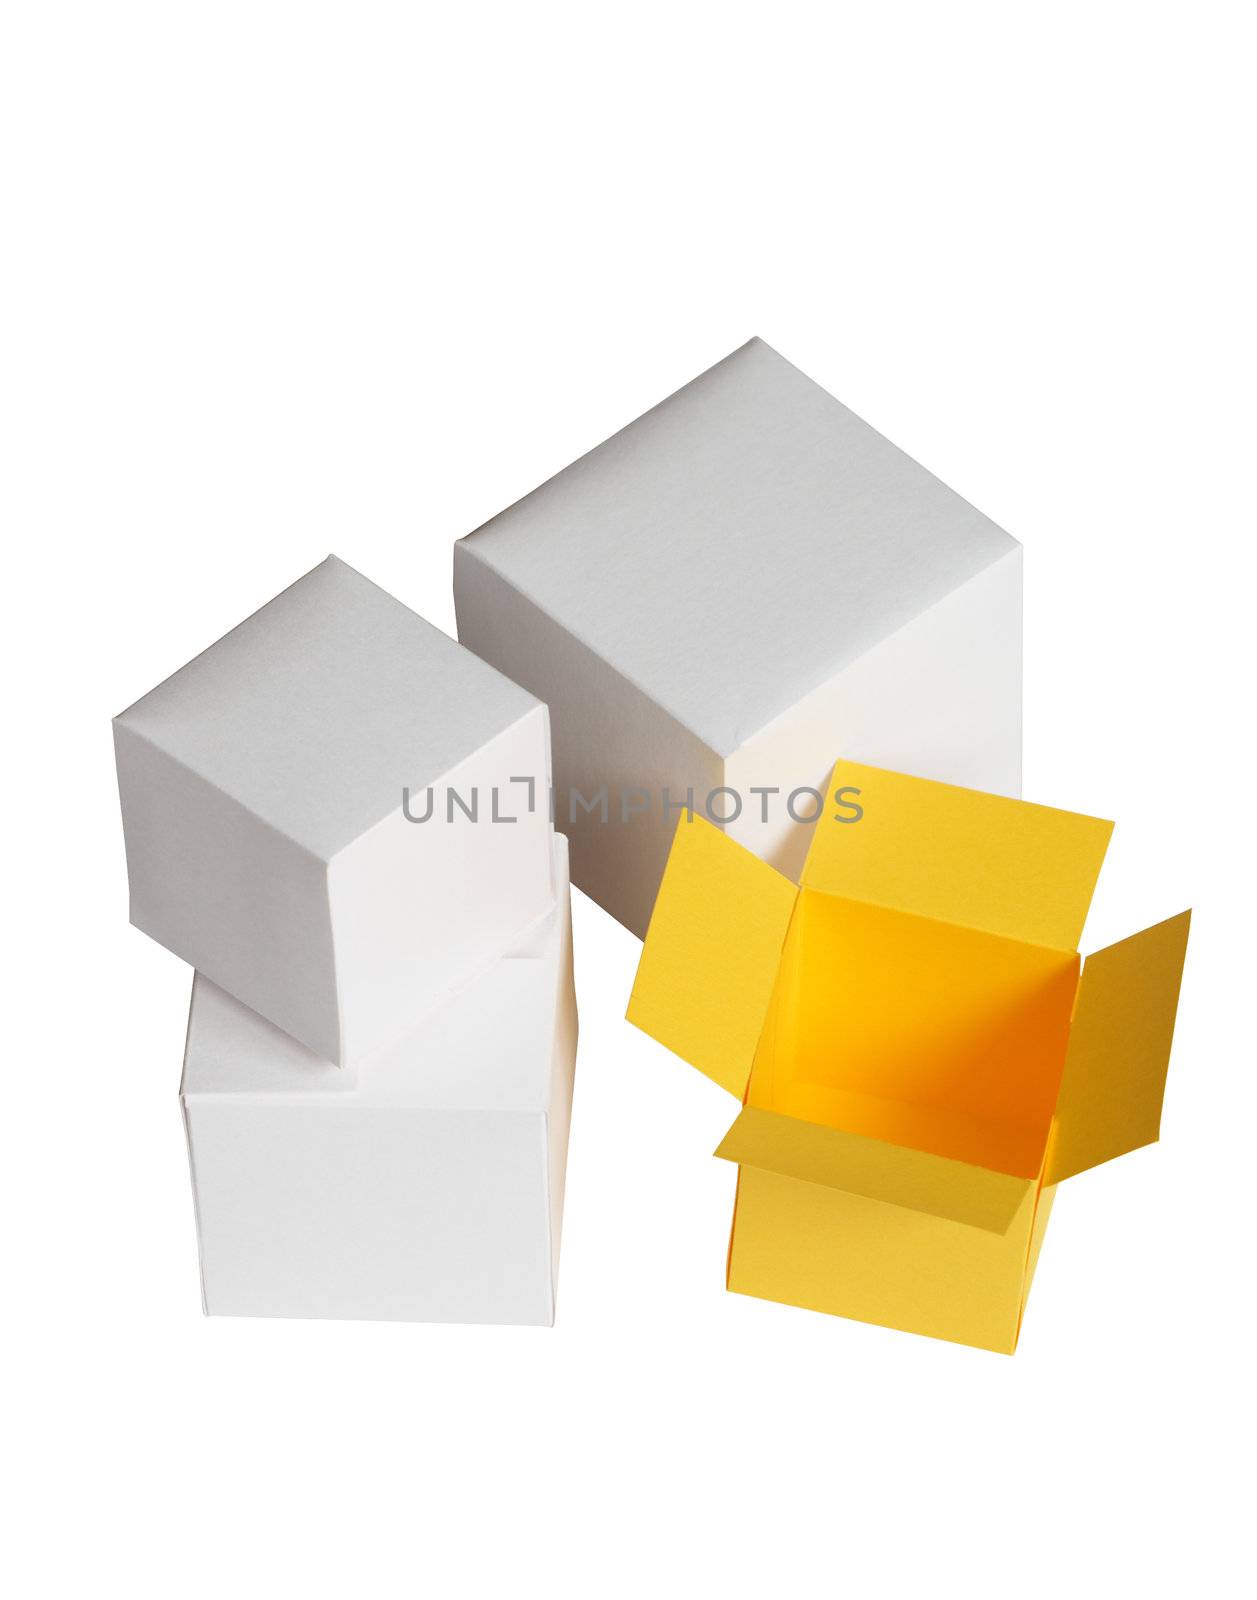 One open yellow paper box near three closed white boxes. Isolated with clipping path